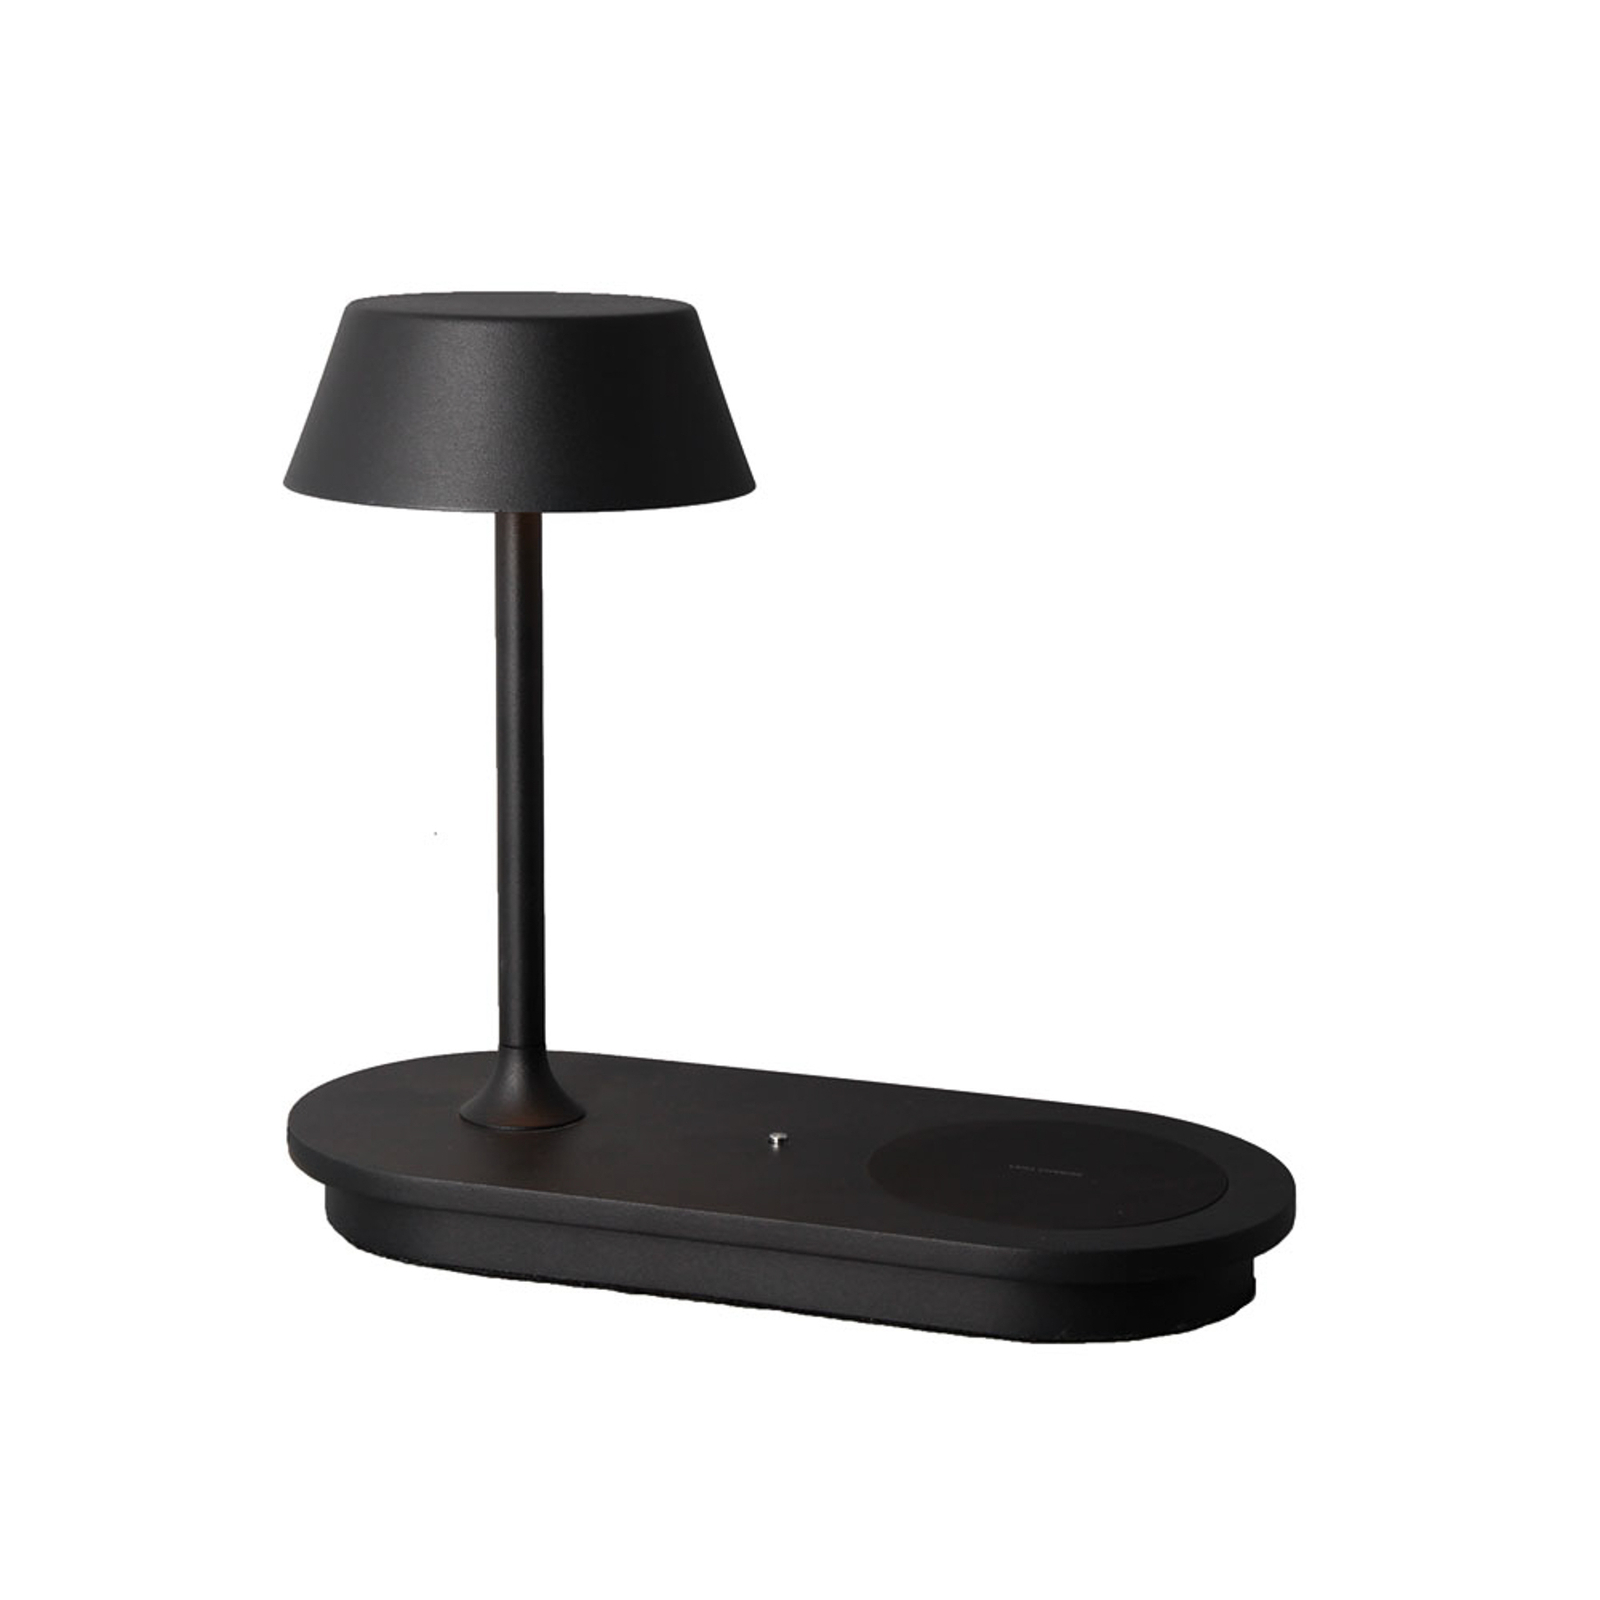 King table lamp, charging function for smartphones